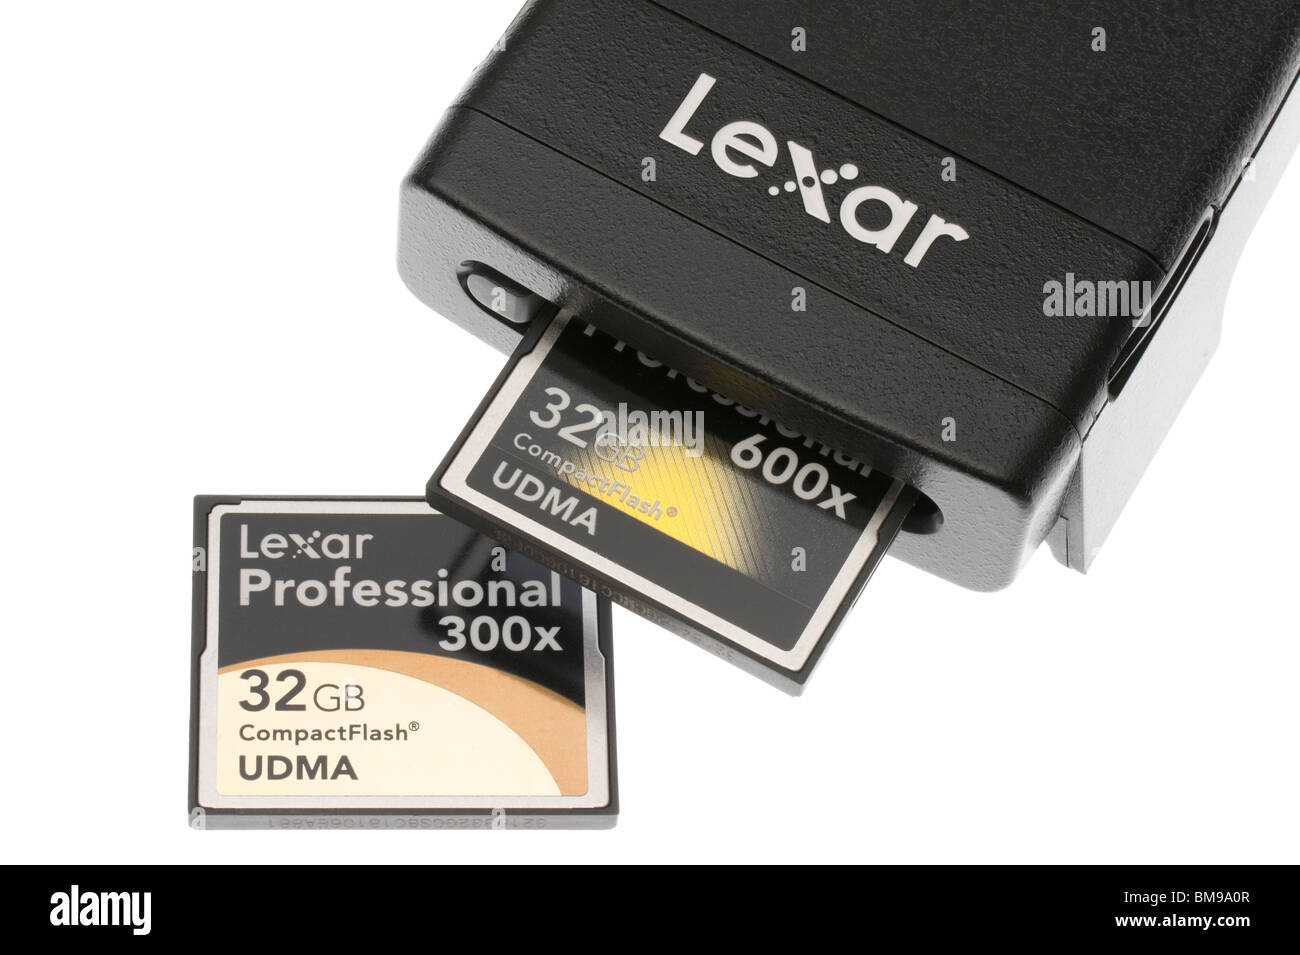 Lexar high speed CompactFlash memory reader Firewire 800 professional with 600X and 300X 32GB memory cards Stock Photo